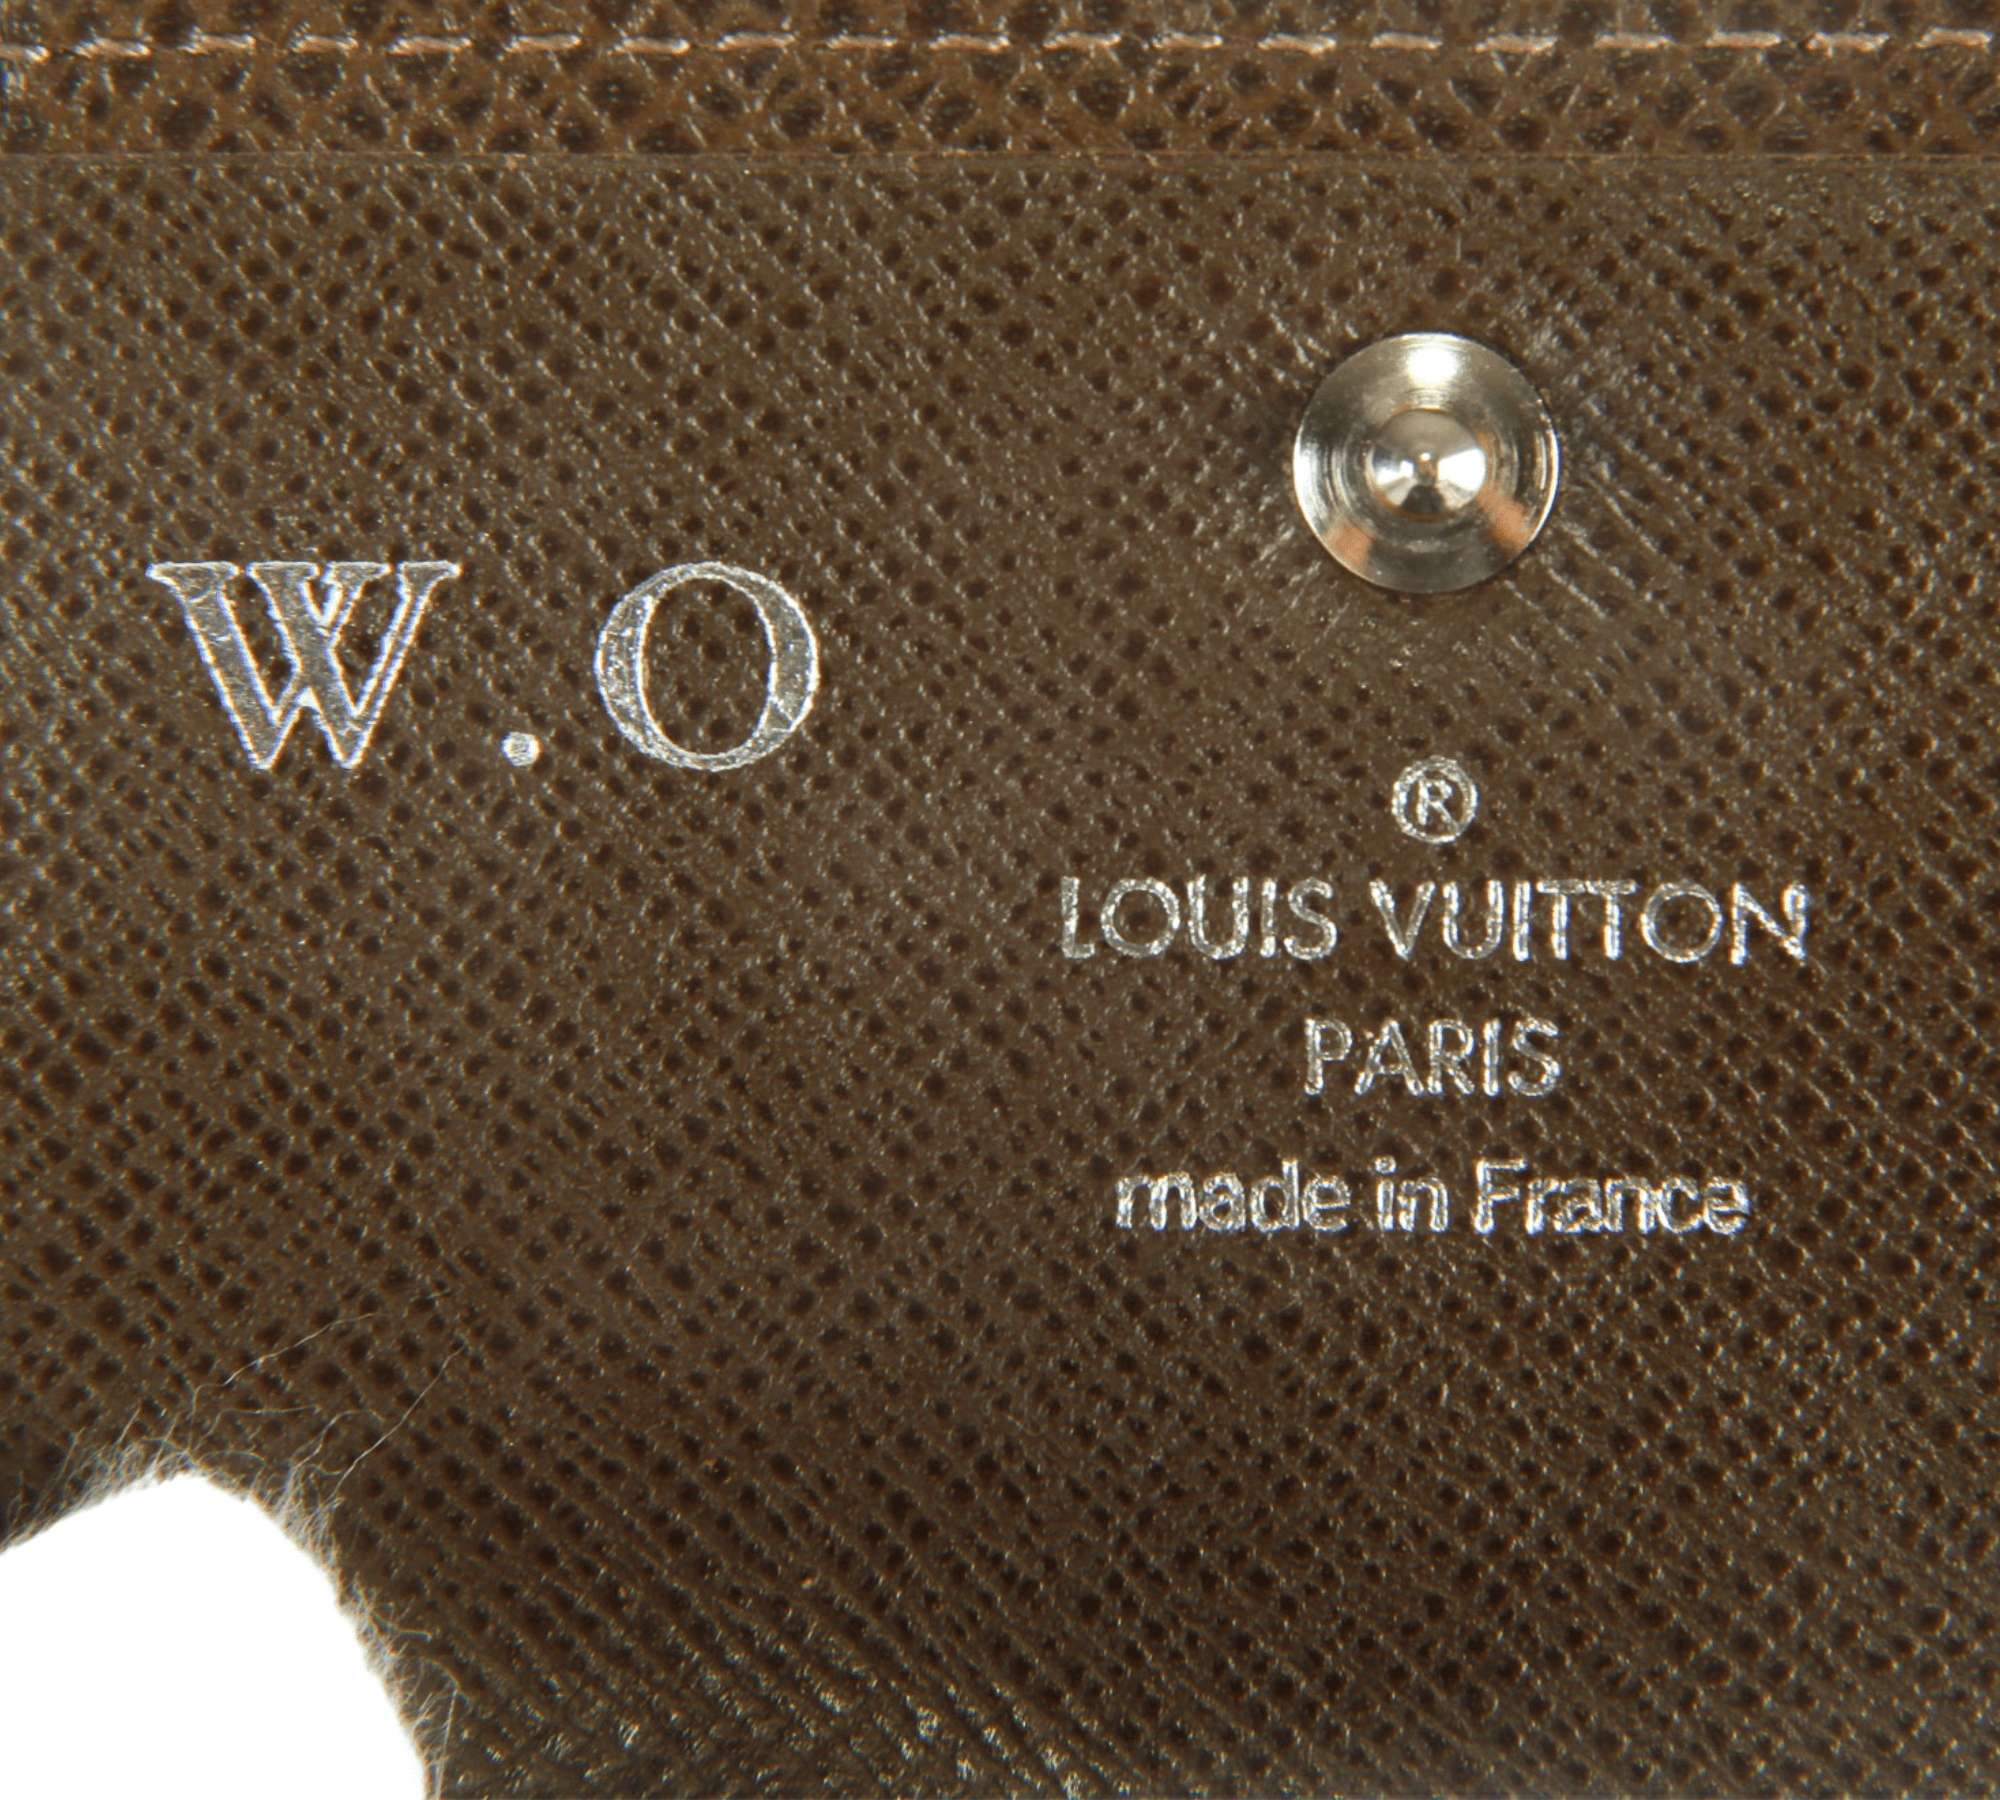 Authentic Louis Vuitton Multiple Monogram Wallet With Engraved Initials